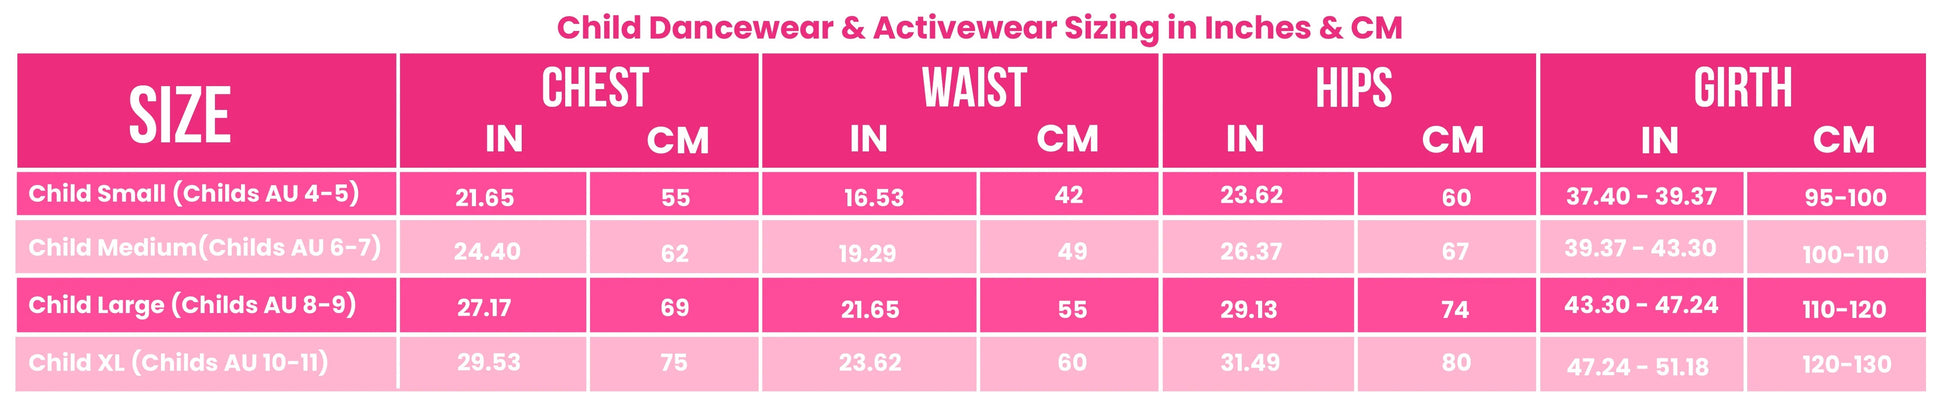 Claudia Dean Adult Size Chart from The Collective Dancewear